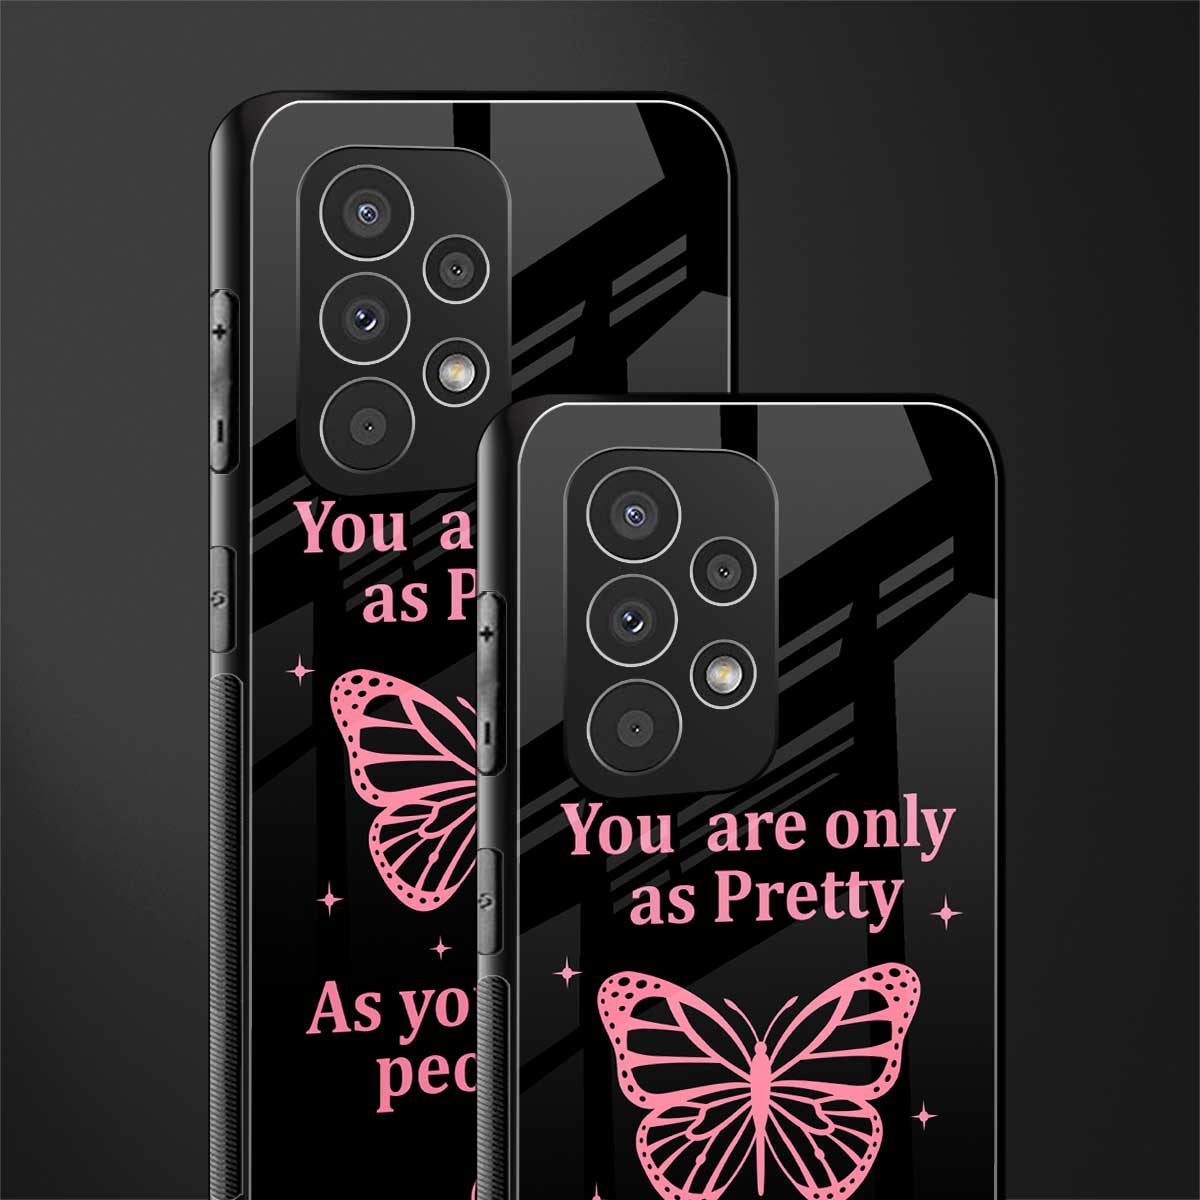 as pretty as you treat people back phone cover | glass case for samsung galaxy a23